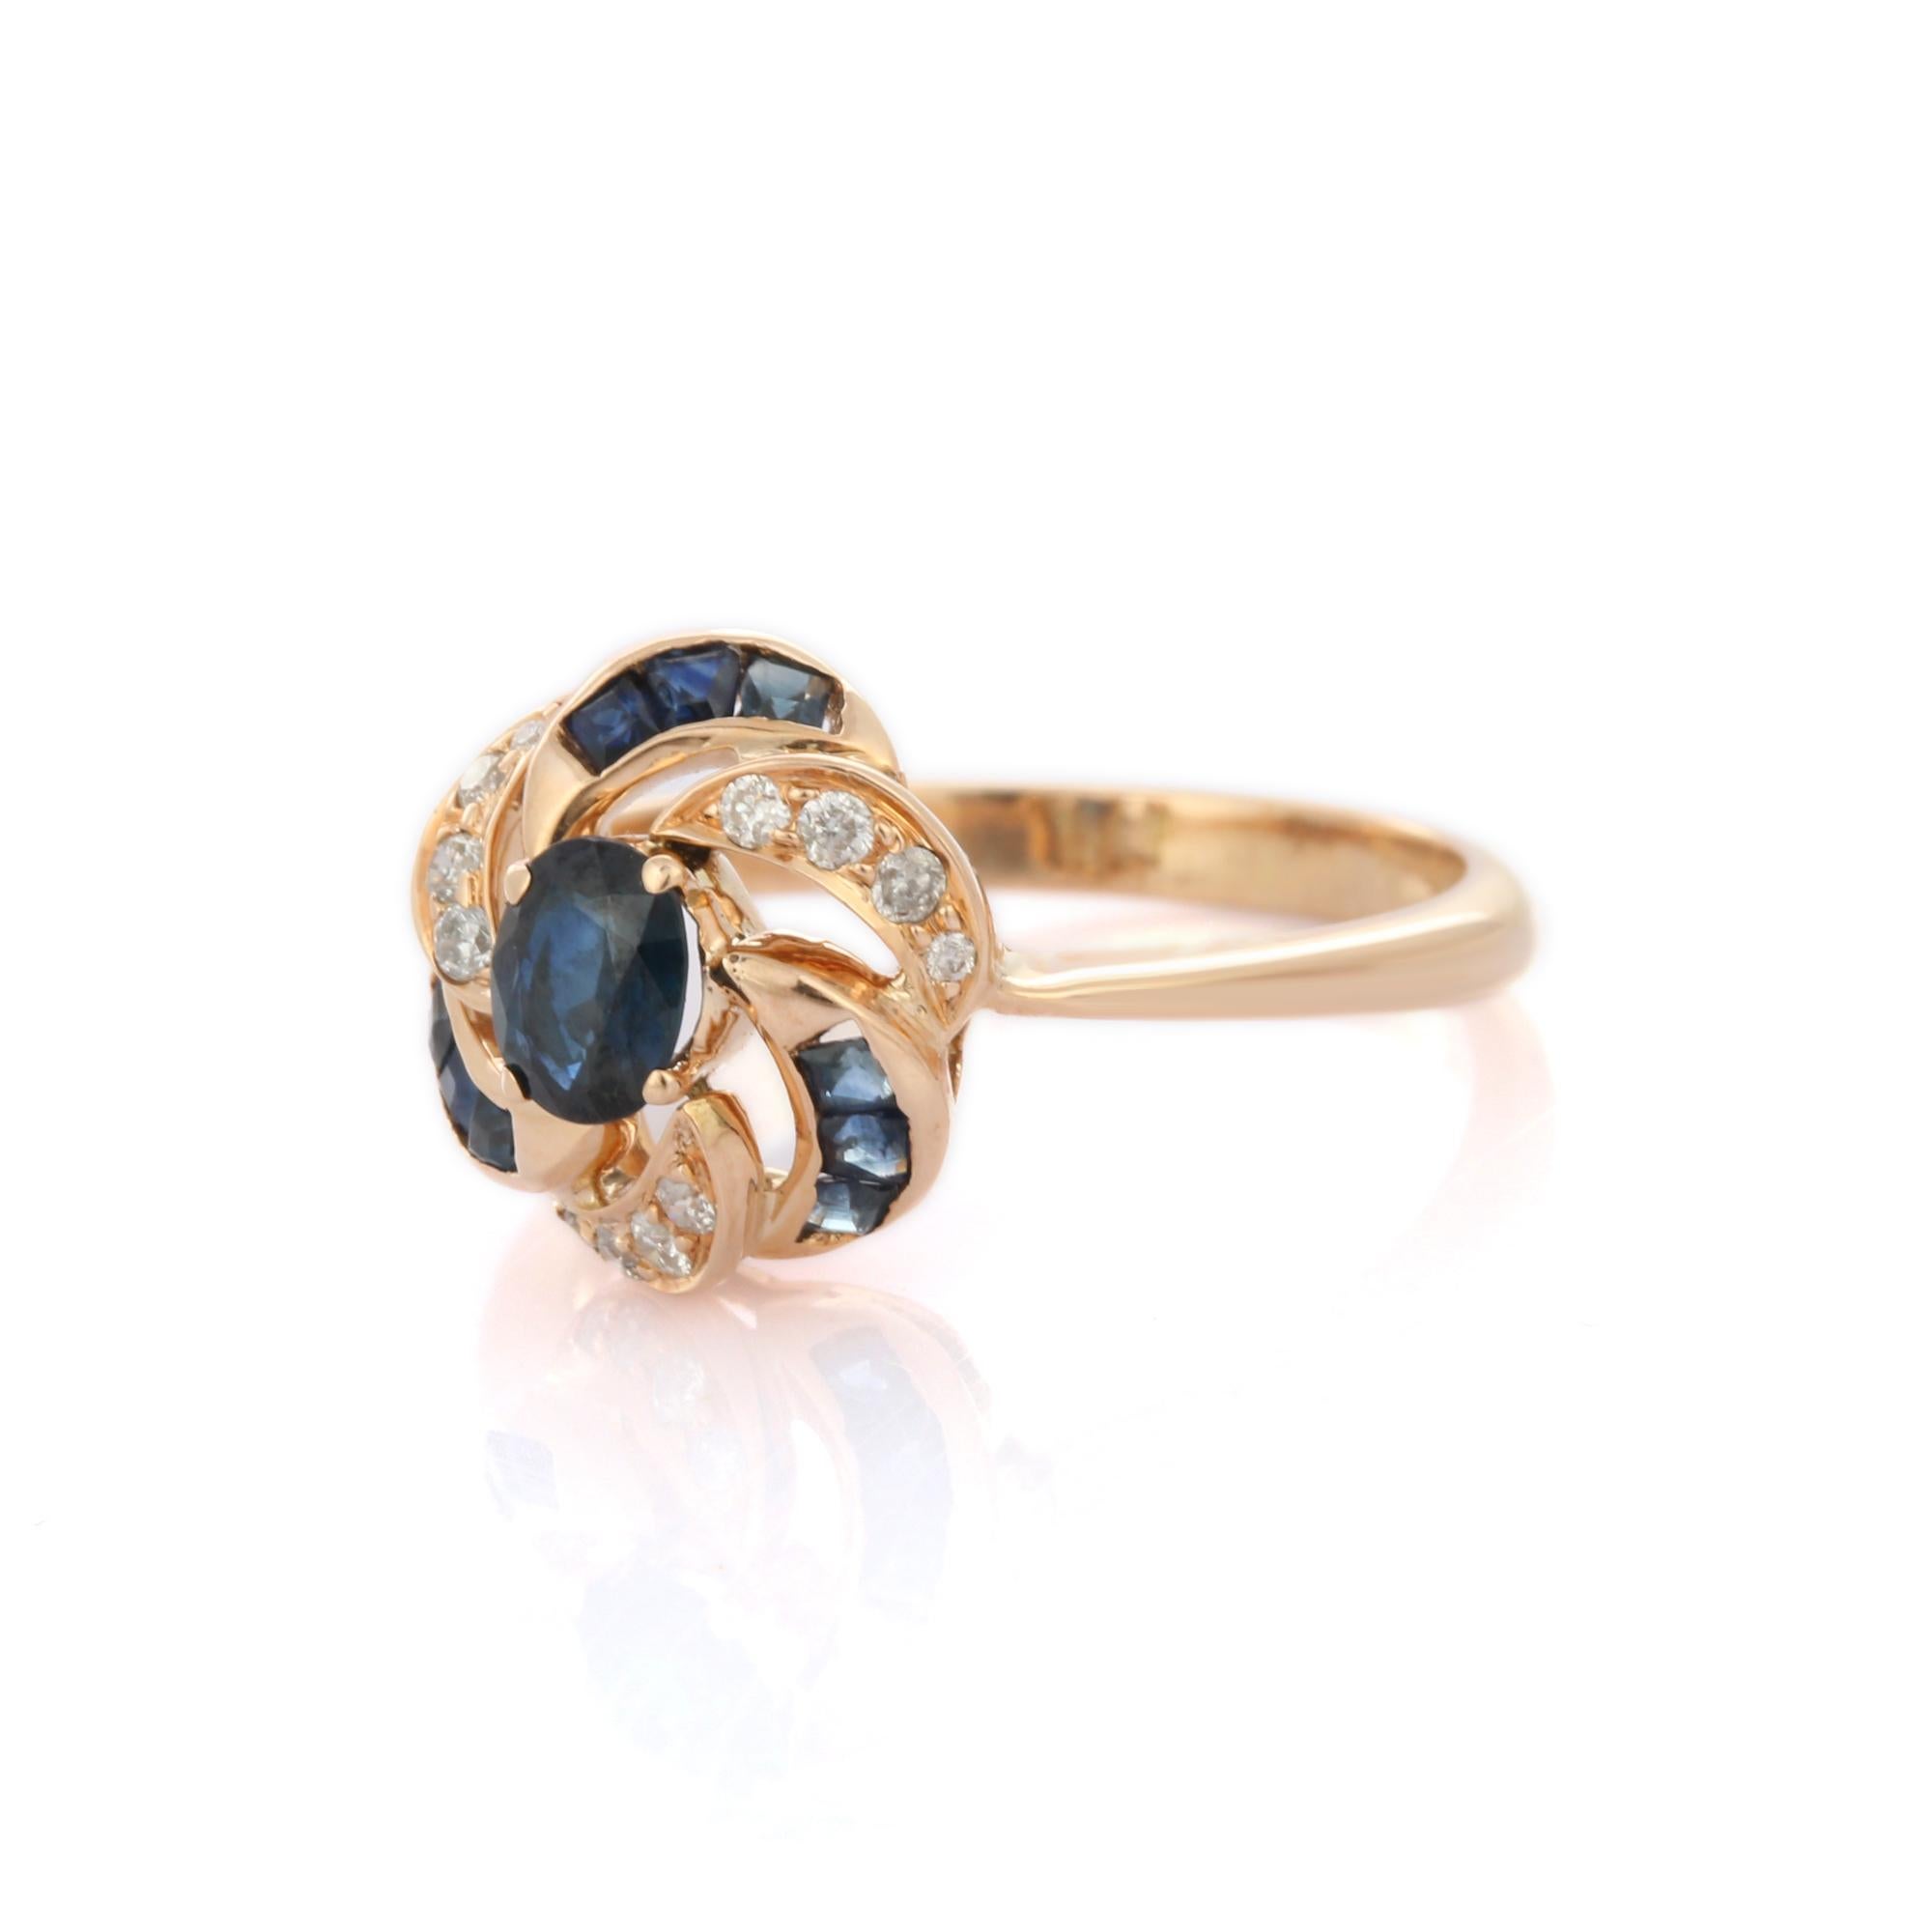 For Sale:  Enticing Sapphire Diamond Floral Bridal Ring in 14K Solid Yellow Gold 3